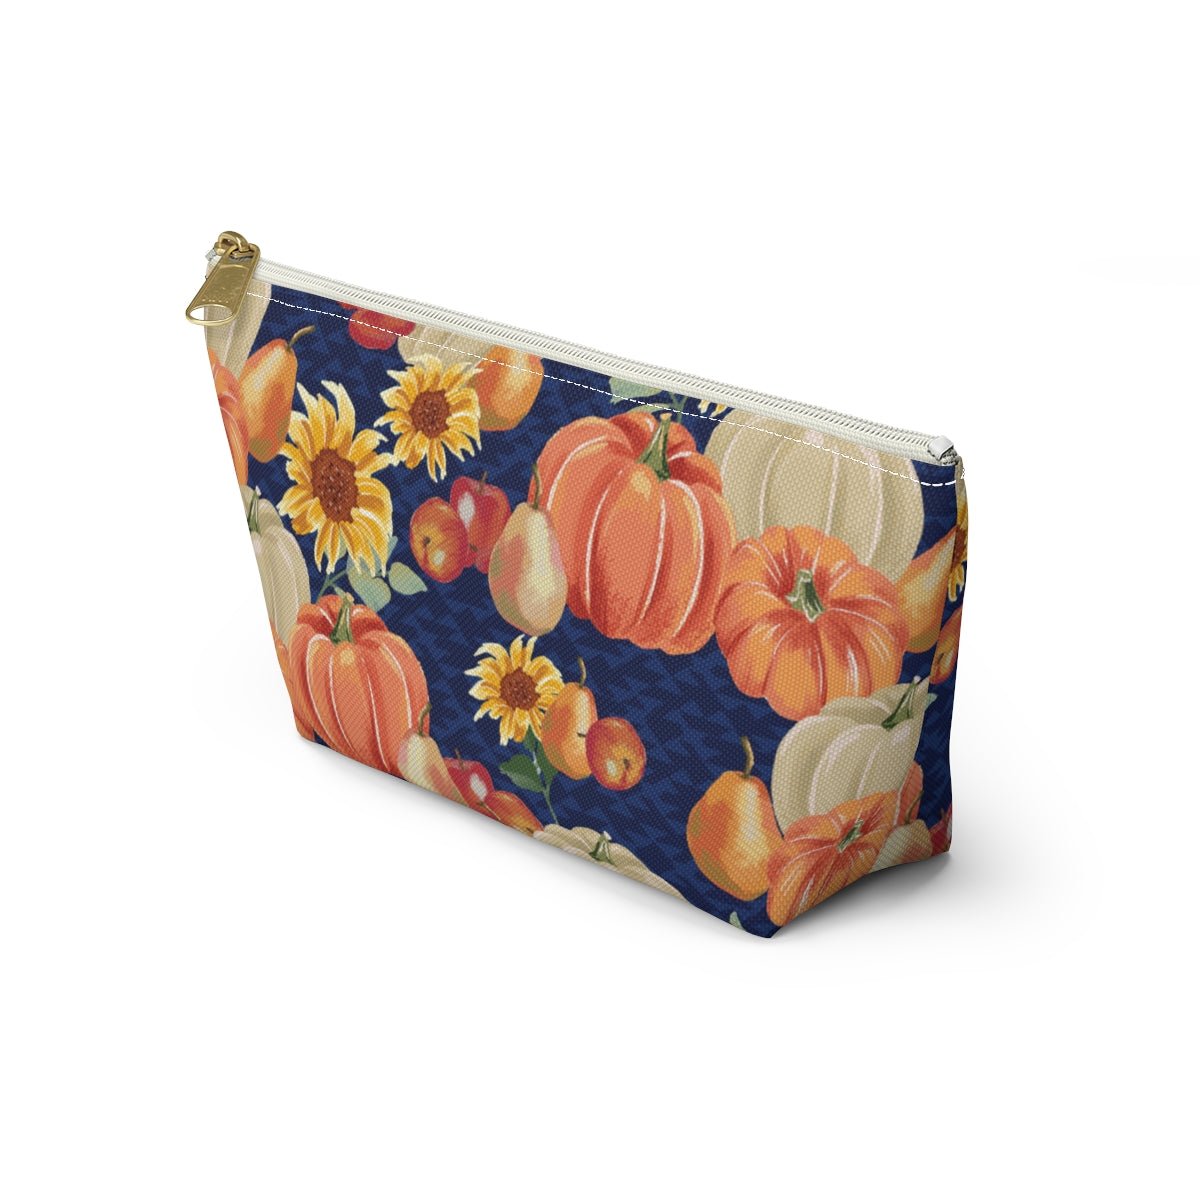 Fall Pumpkins and Sunflowers Accessory Pouch w T-bottom - Puffin Lime